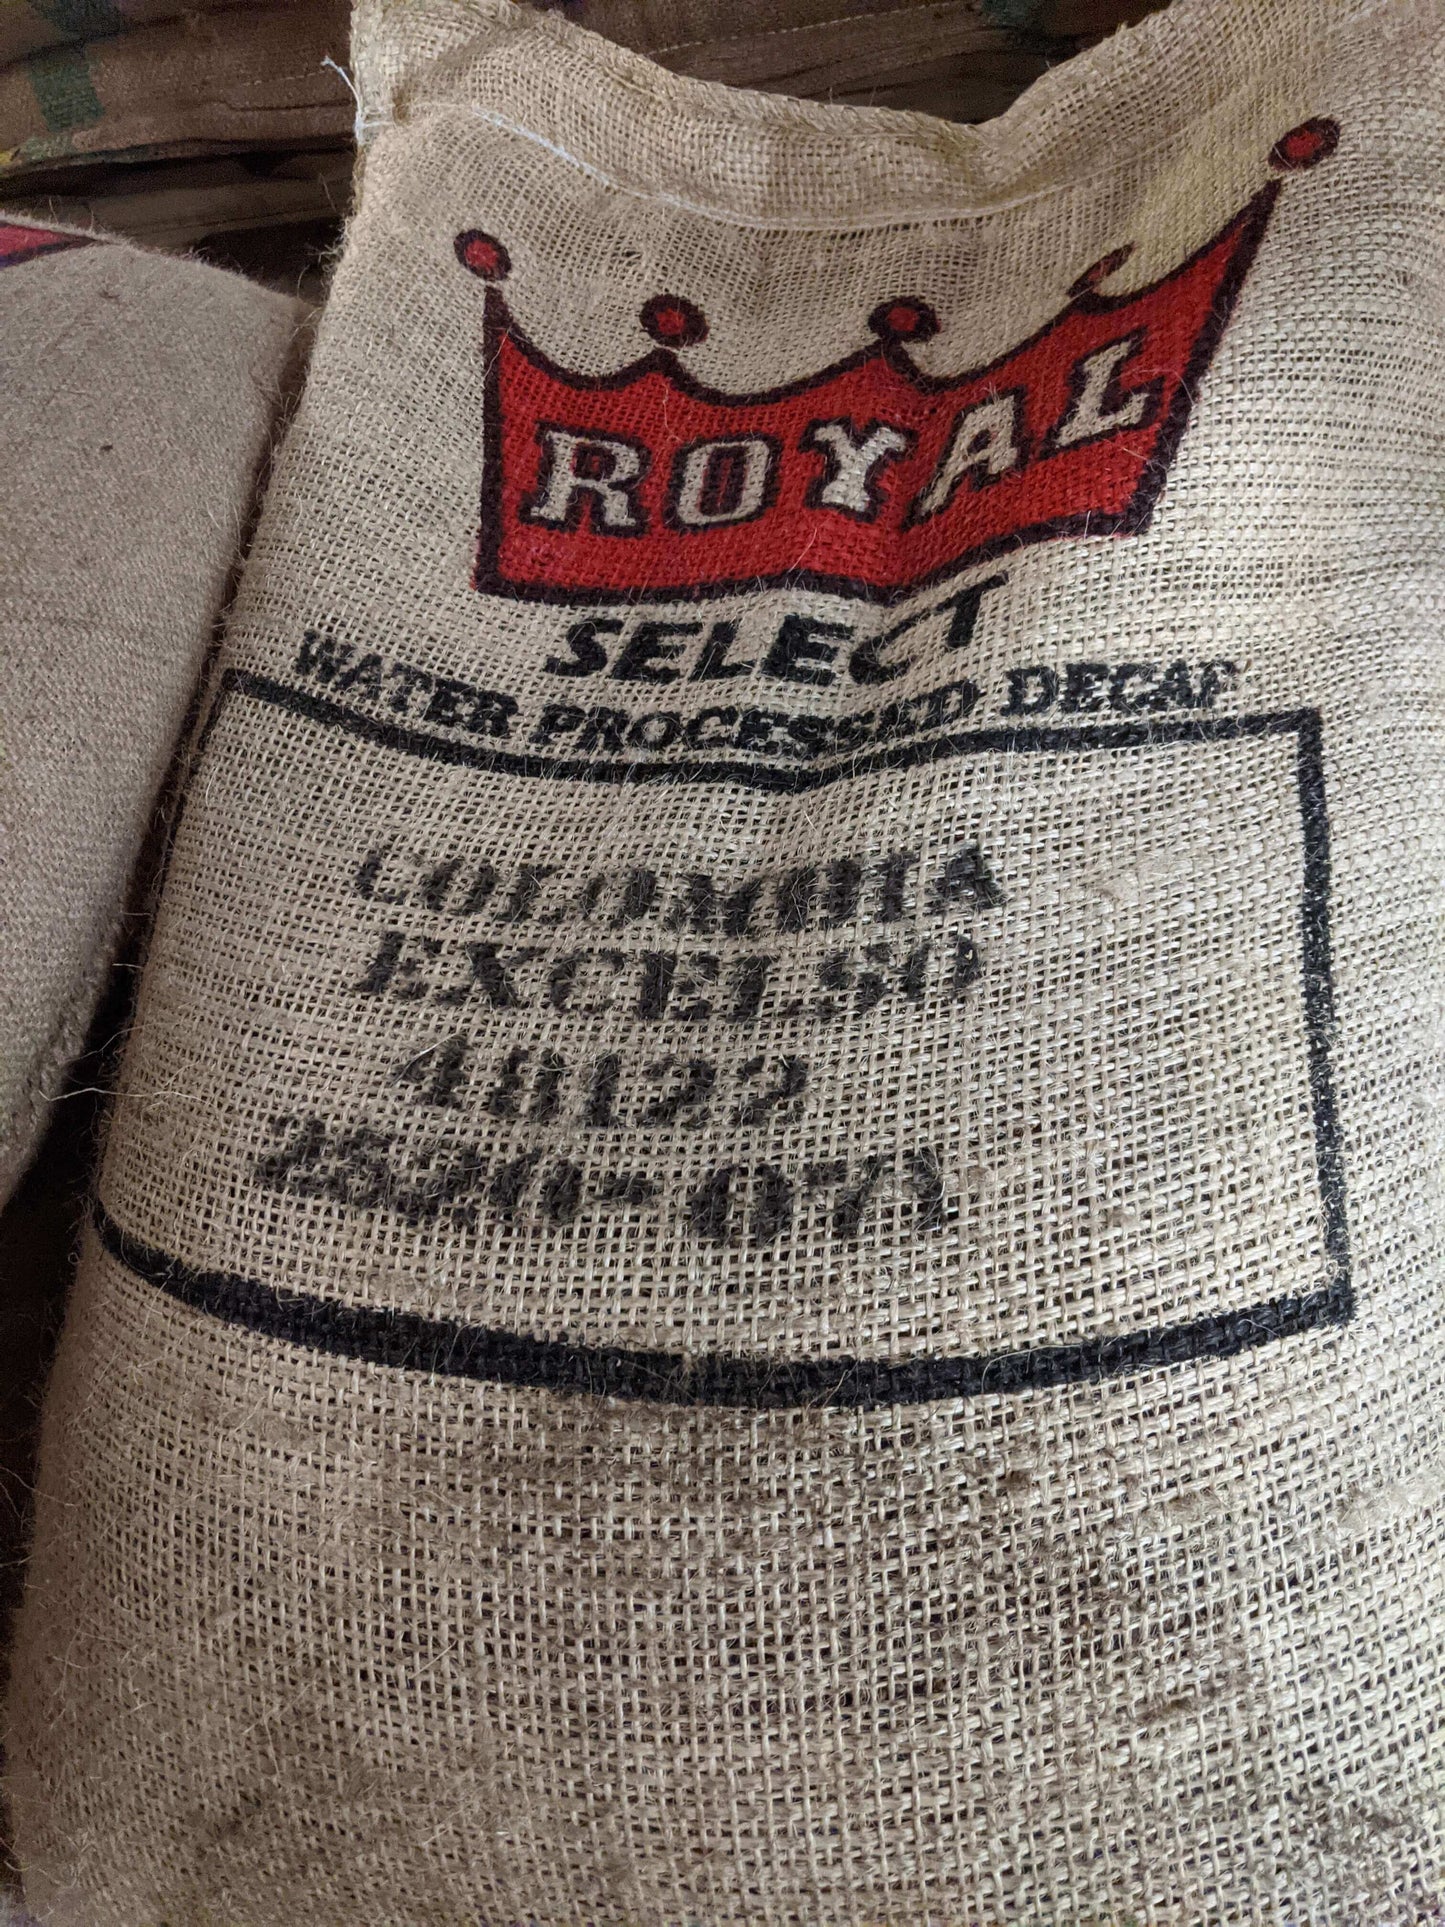 Decaf Colombia (Mountain Water Process)